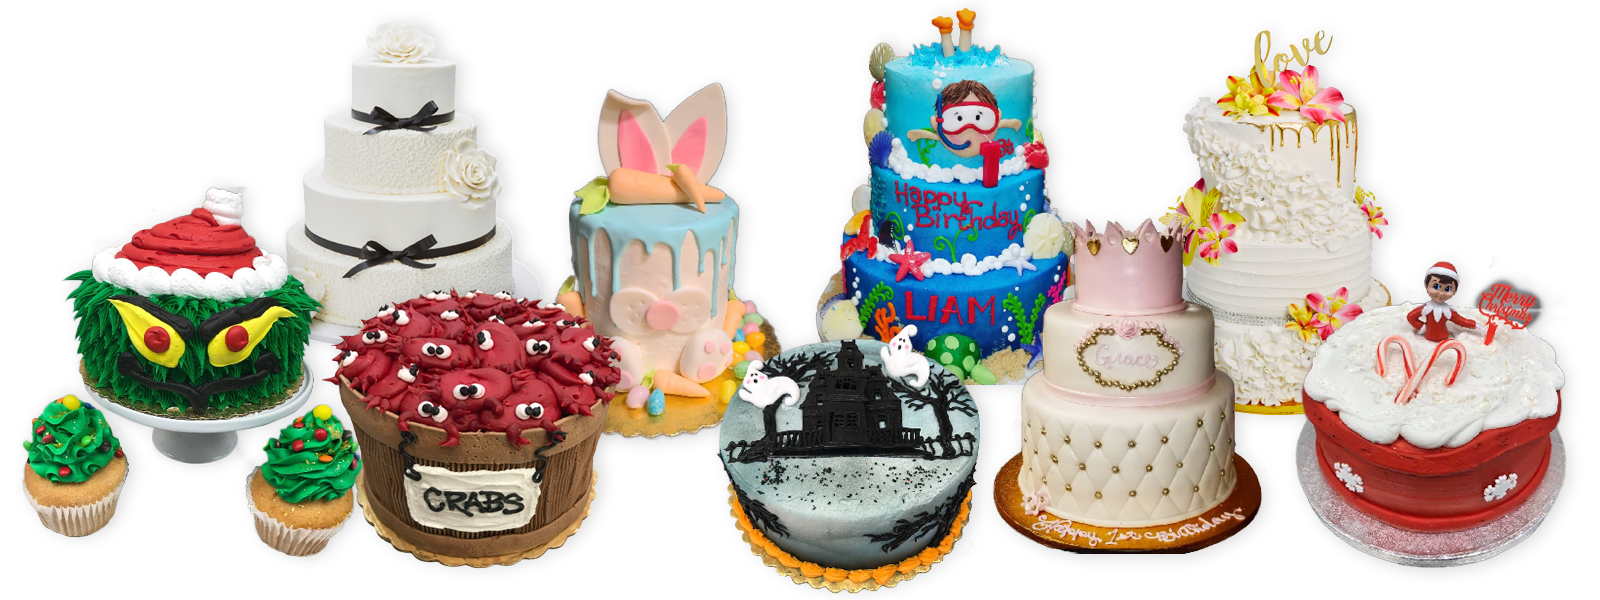 https://www.greenvalleymarketplace.com/images/cake-row.png